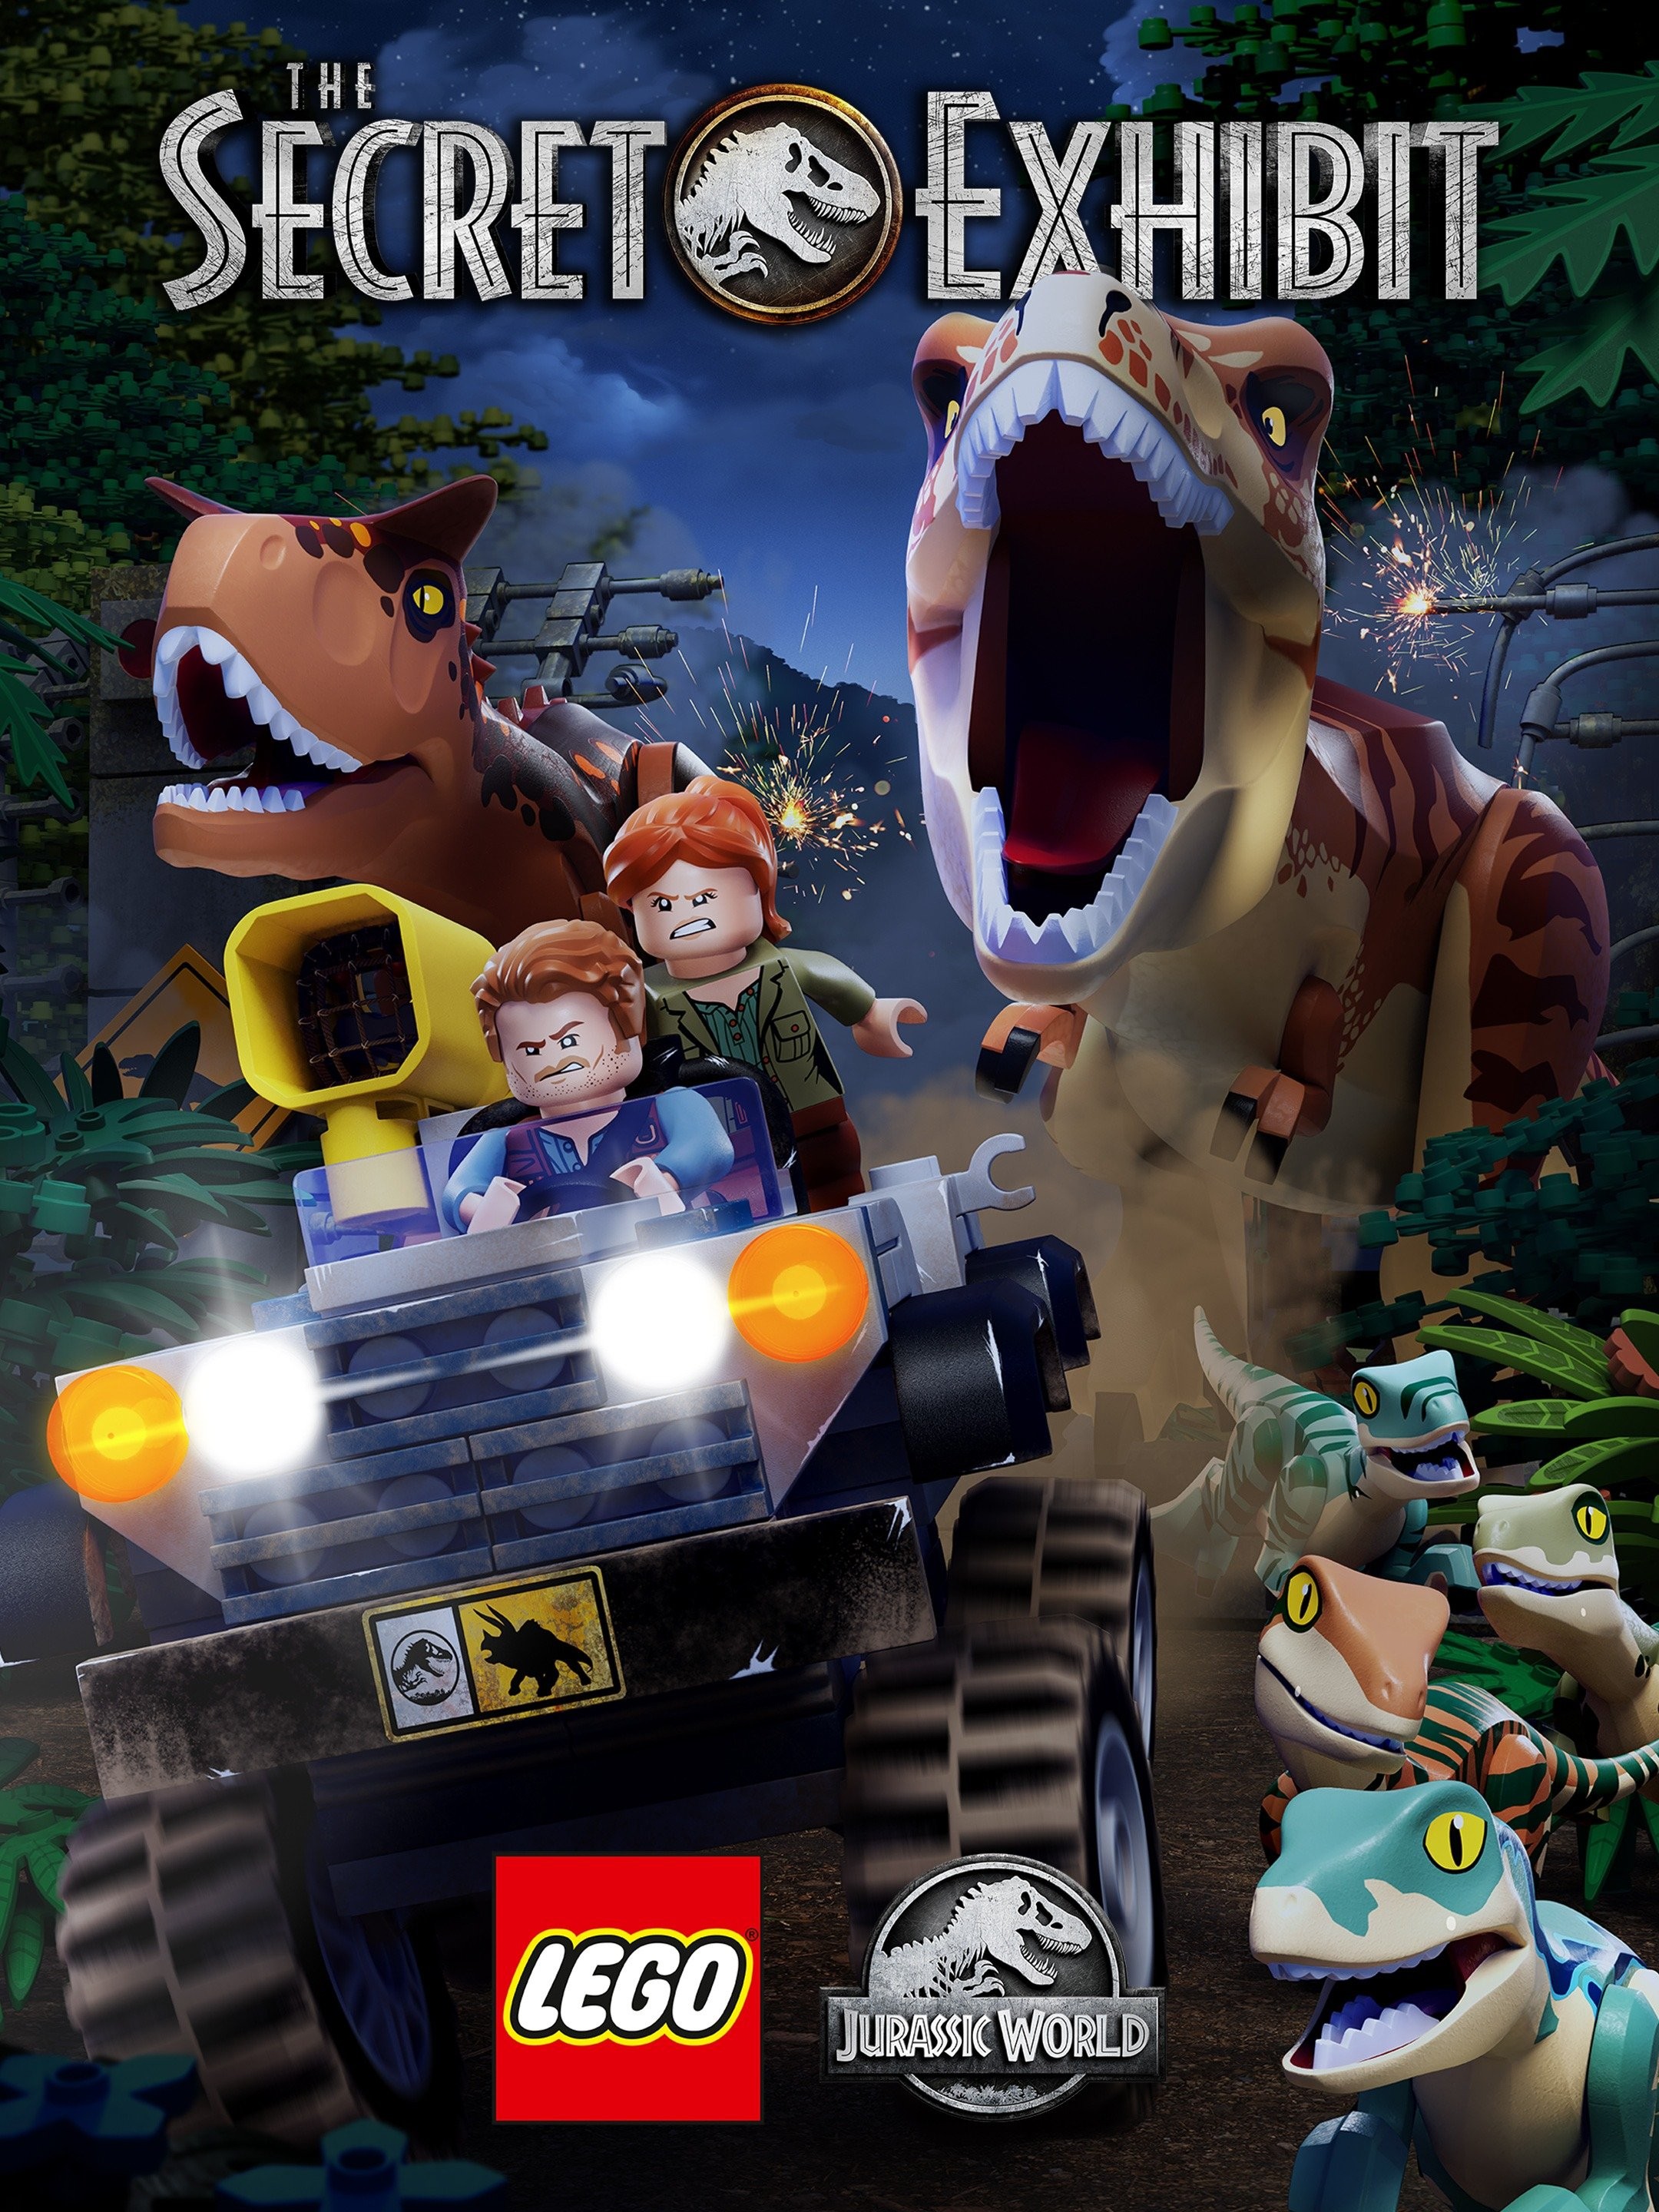 Lego Jurassic World is coming to Switch this September